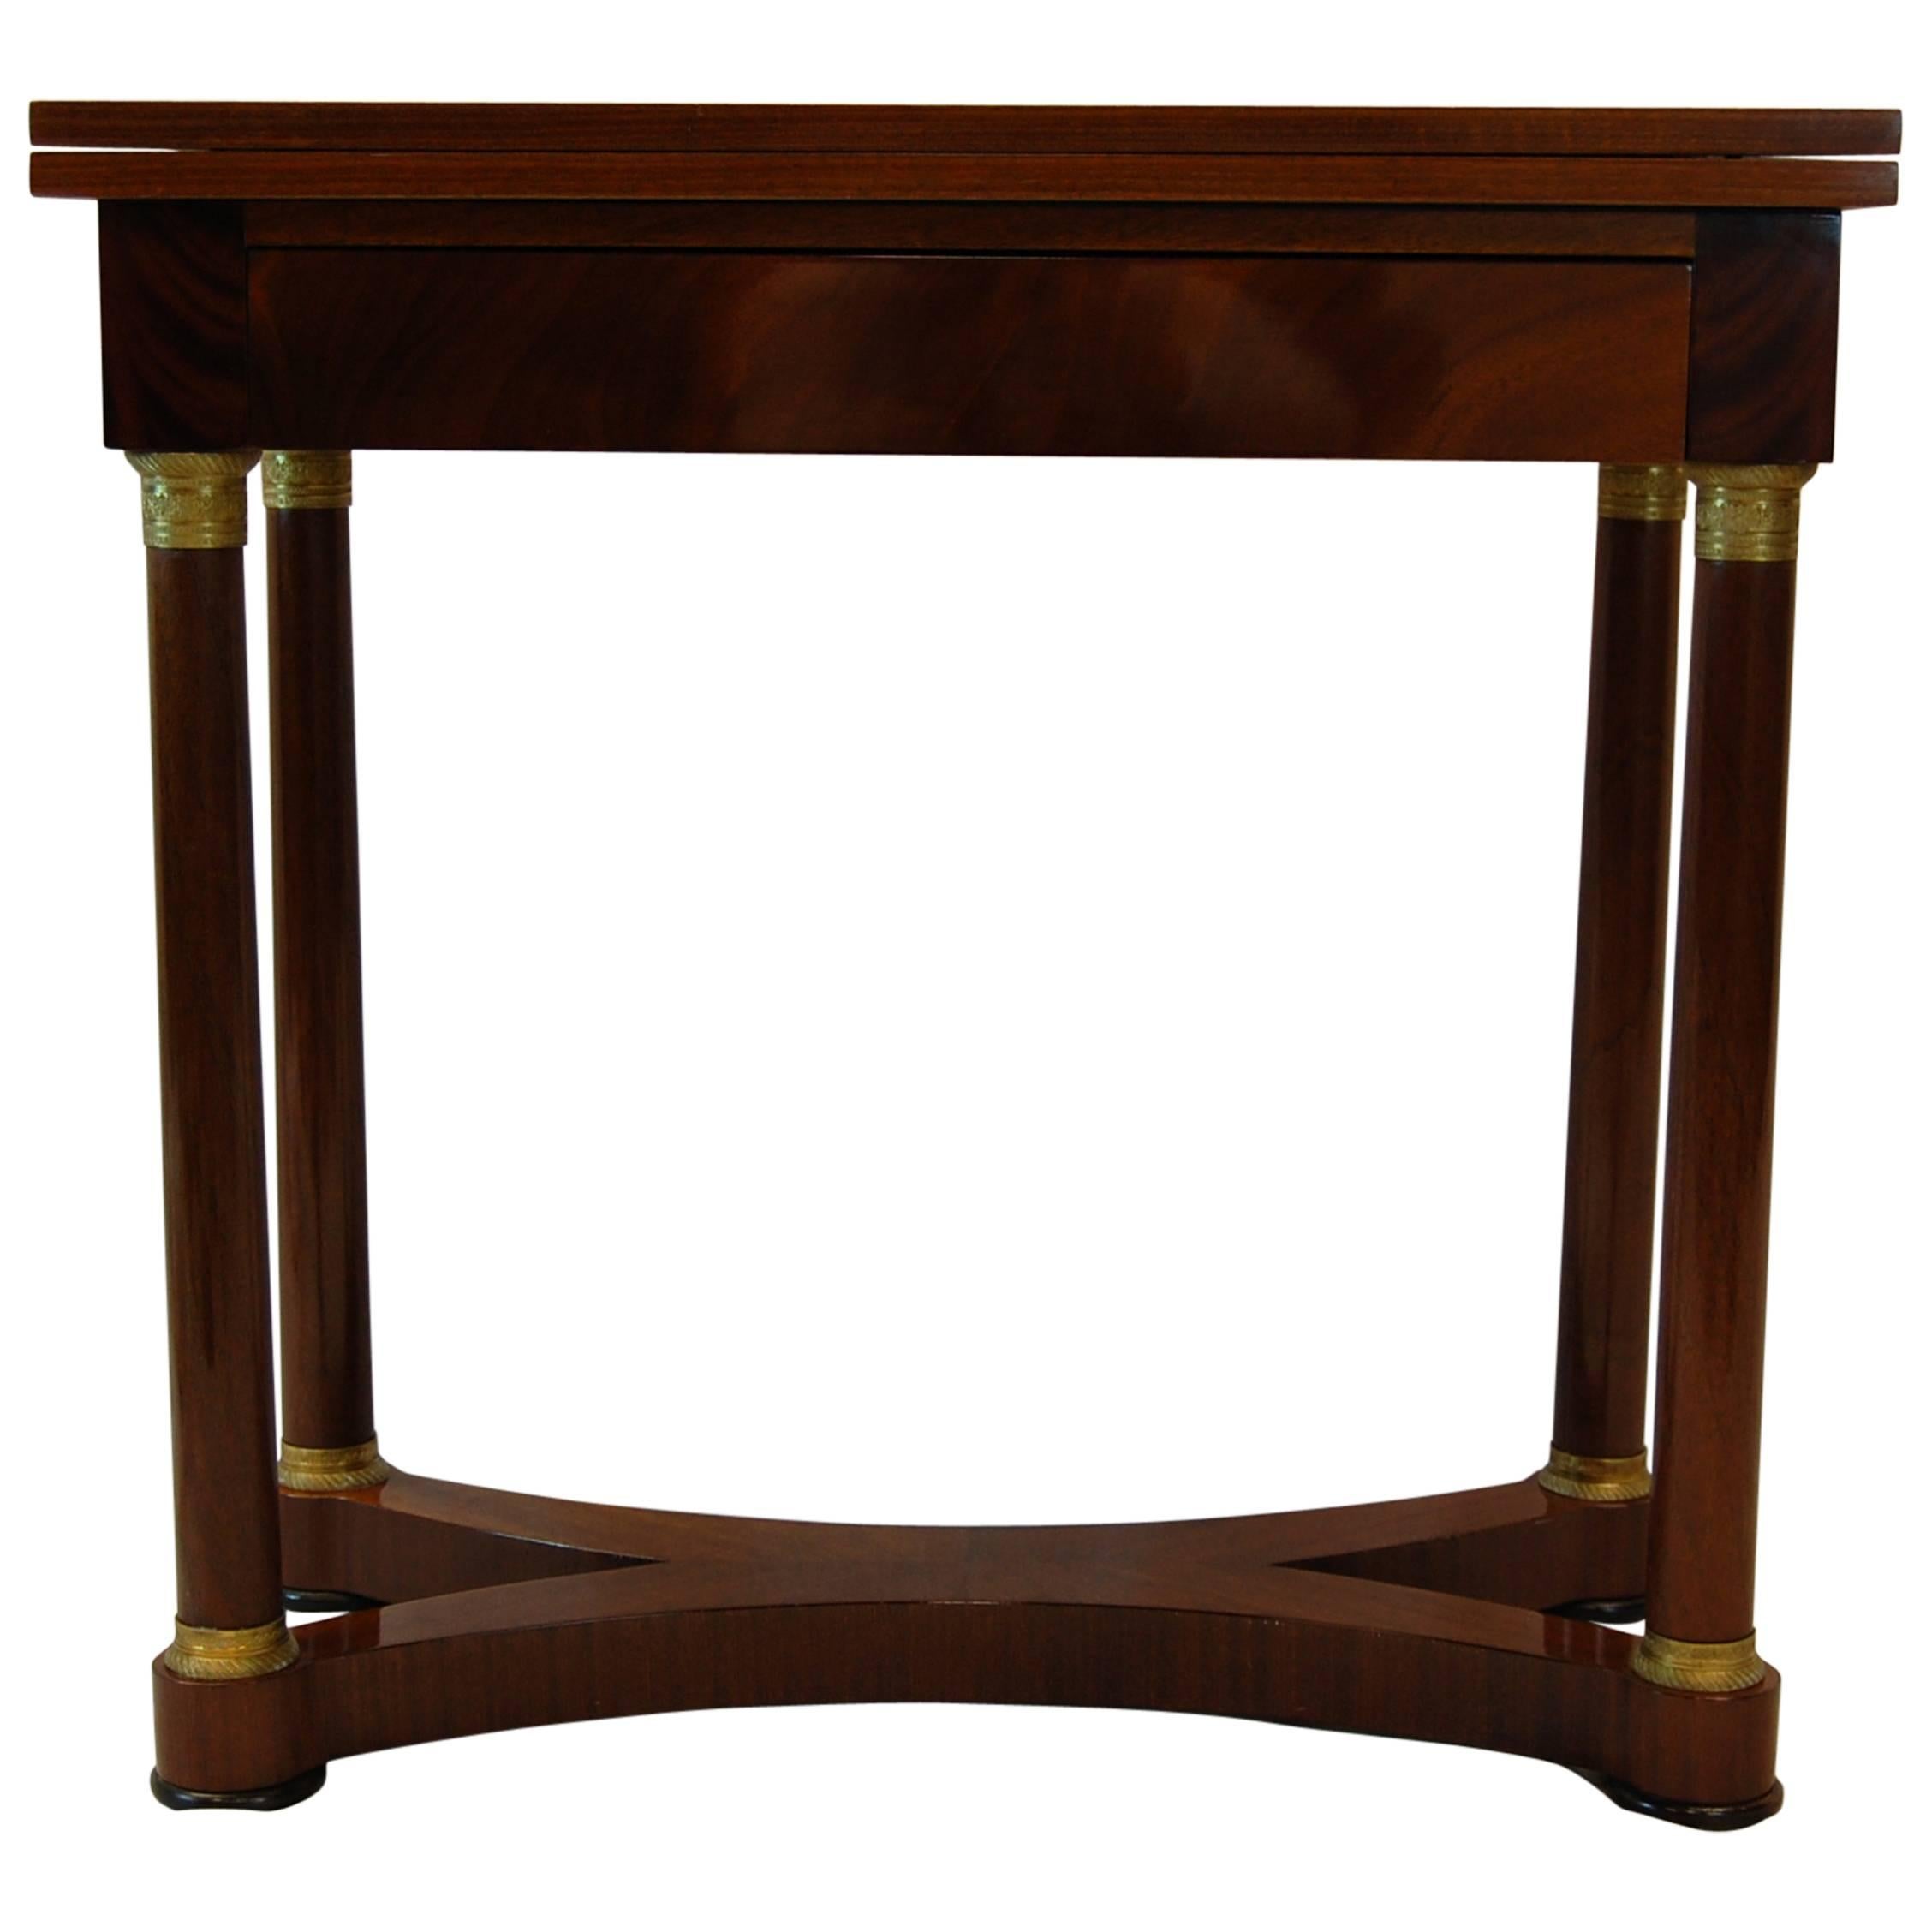 Mahogany Flip-Top Card Table with Leather Insert, circa 1880